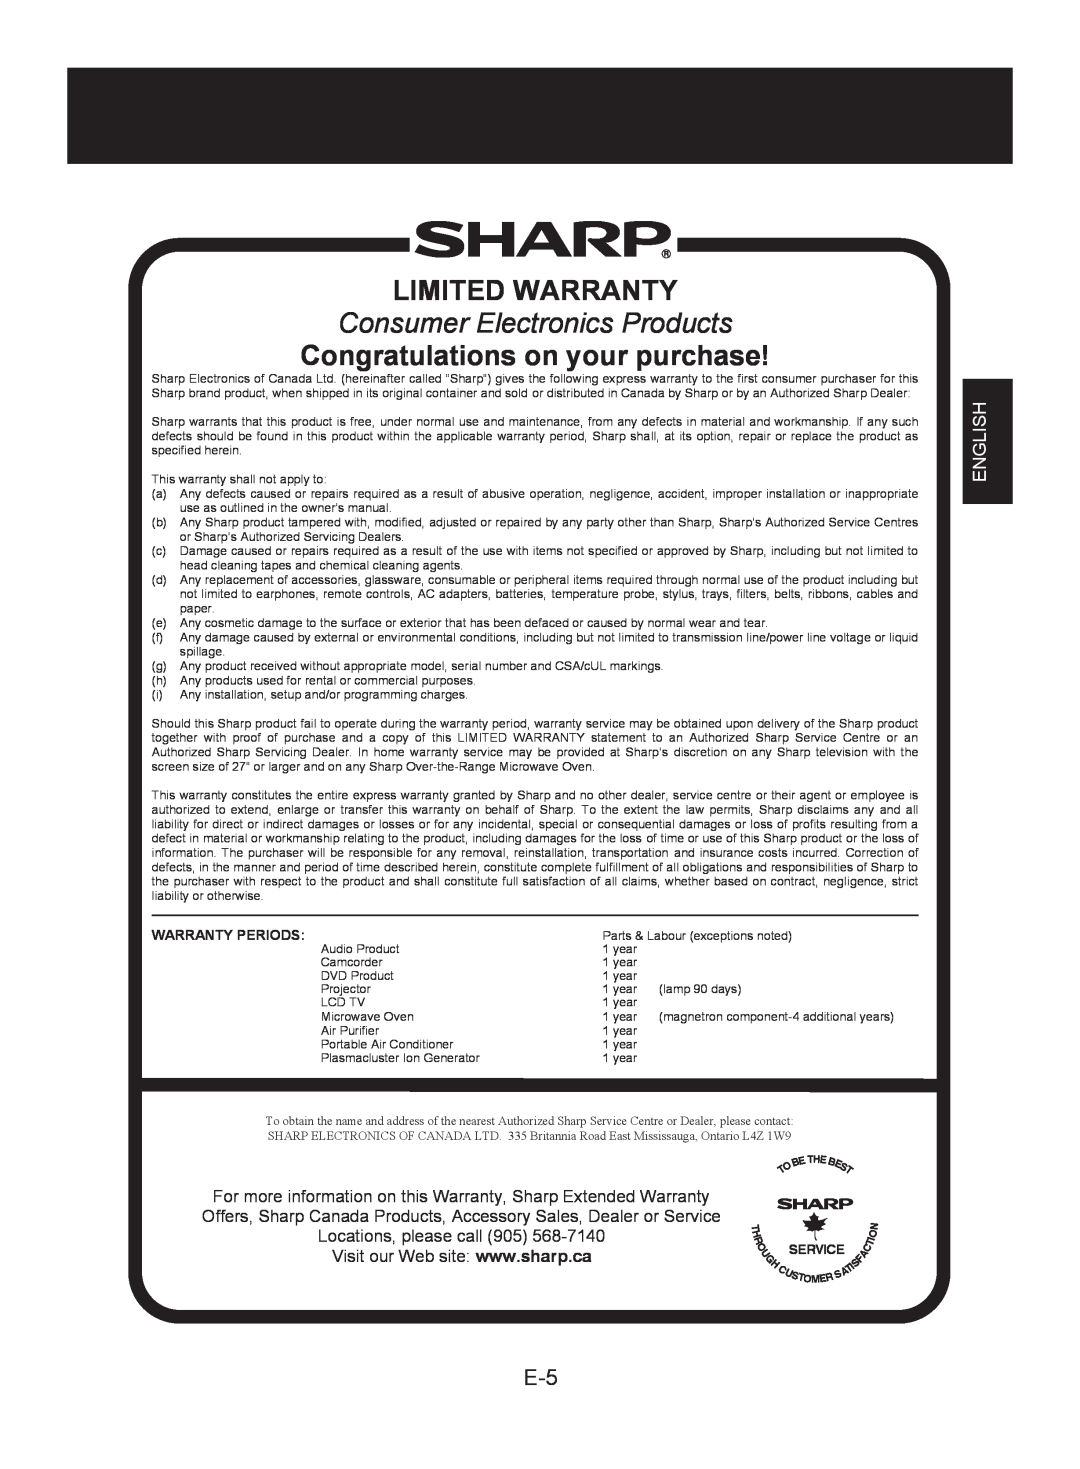 Sharp FP-A40C Limited Warranty, Consumer Electronics Products, Congratulations on your purchase, English, Warranty Periods 